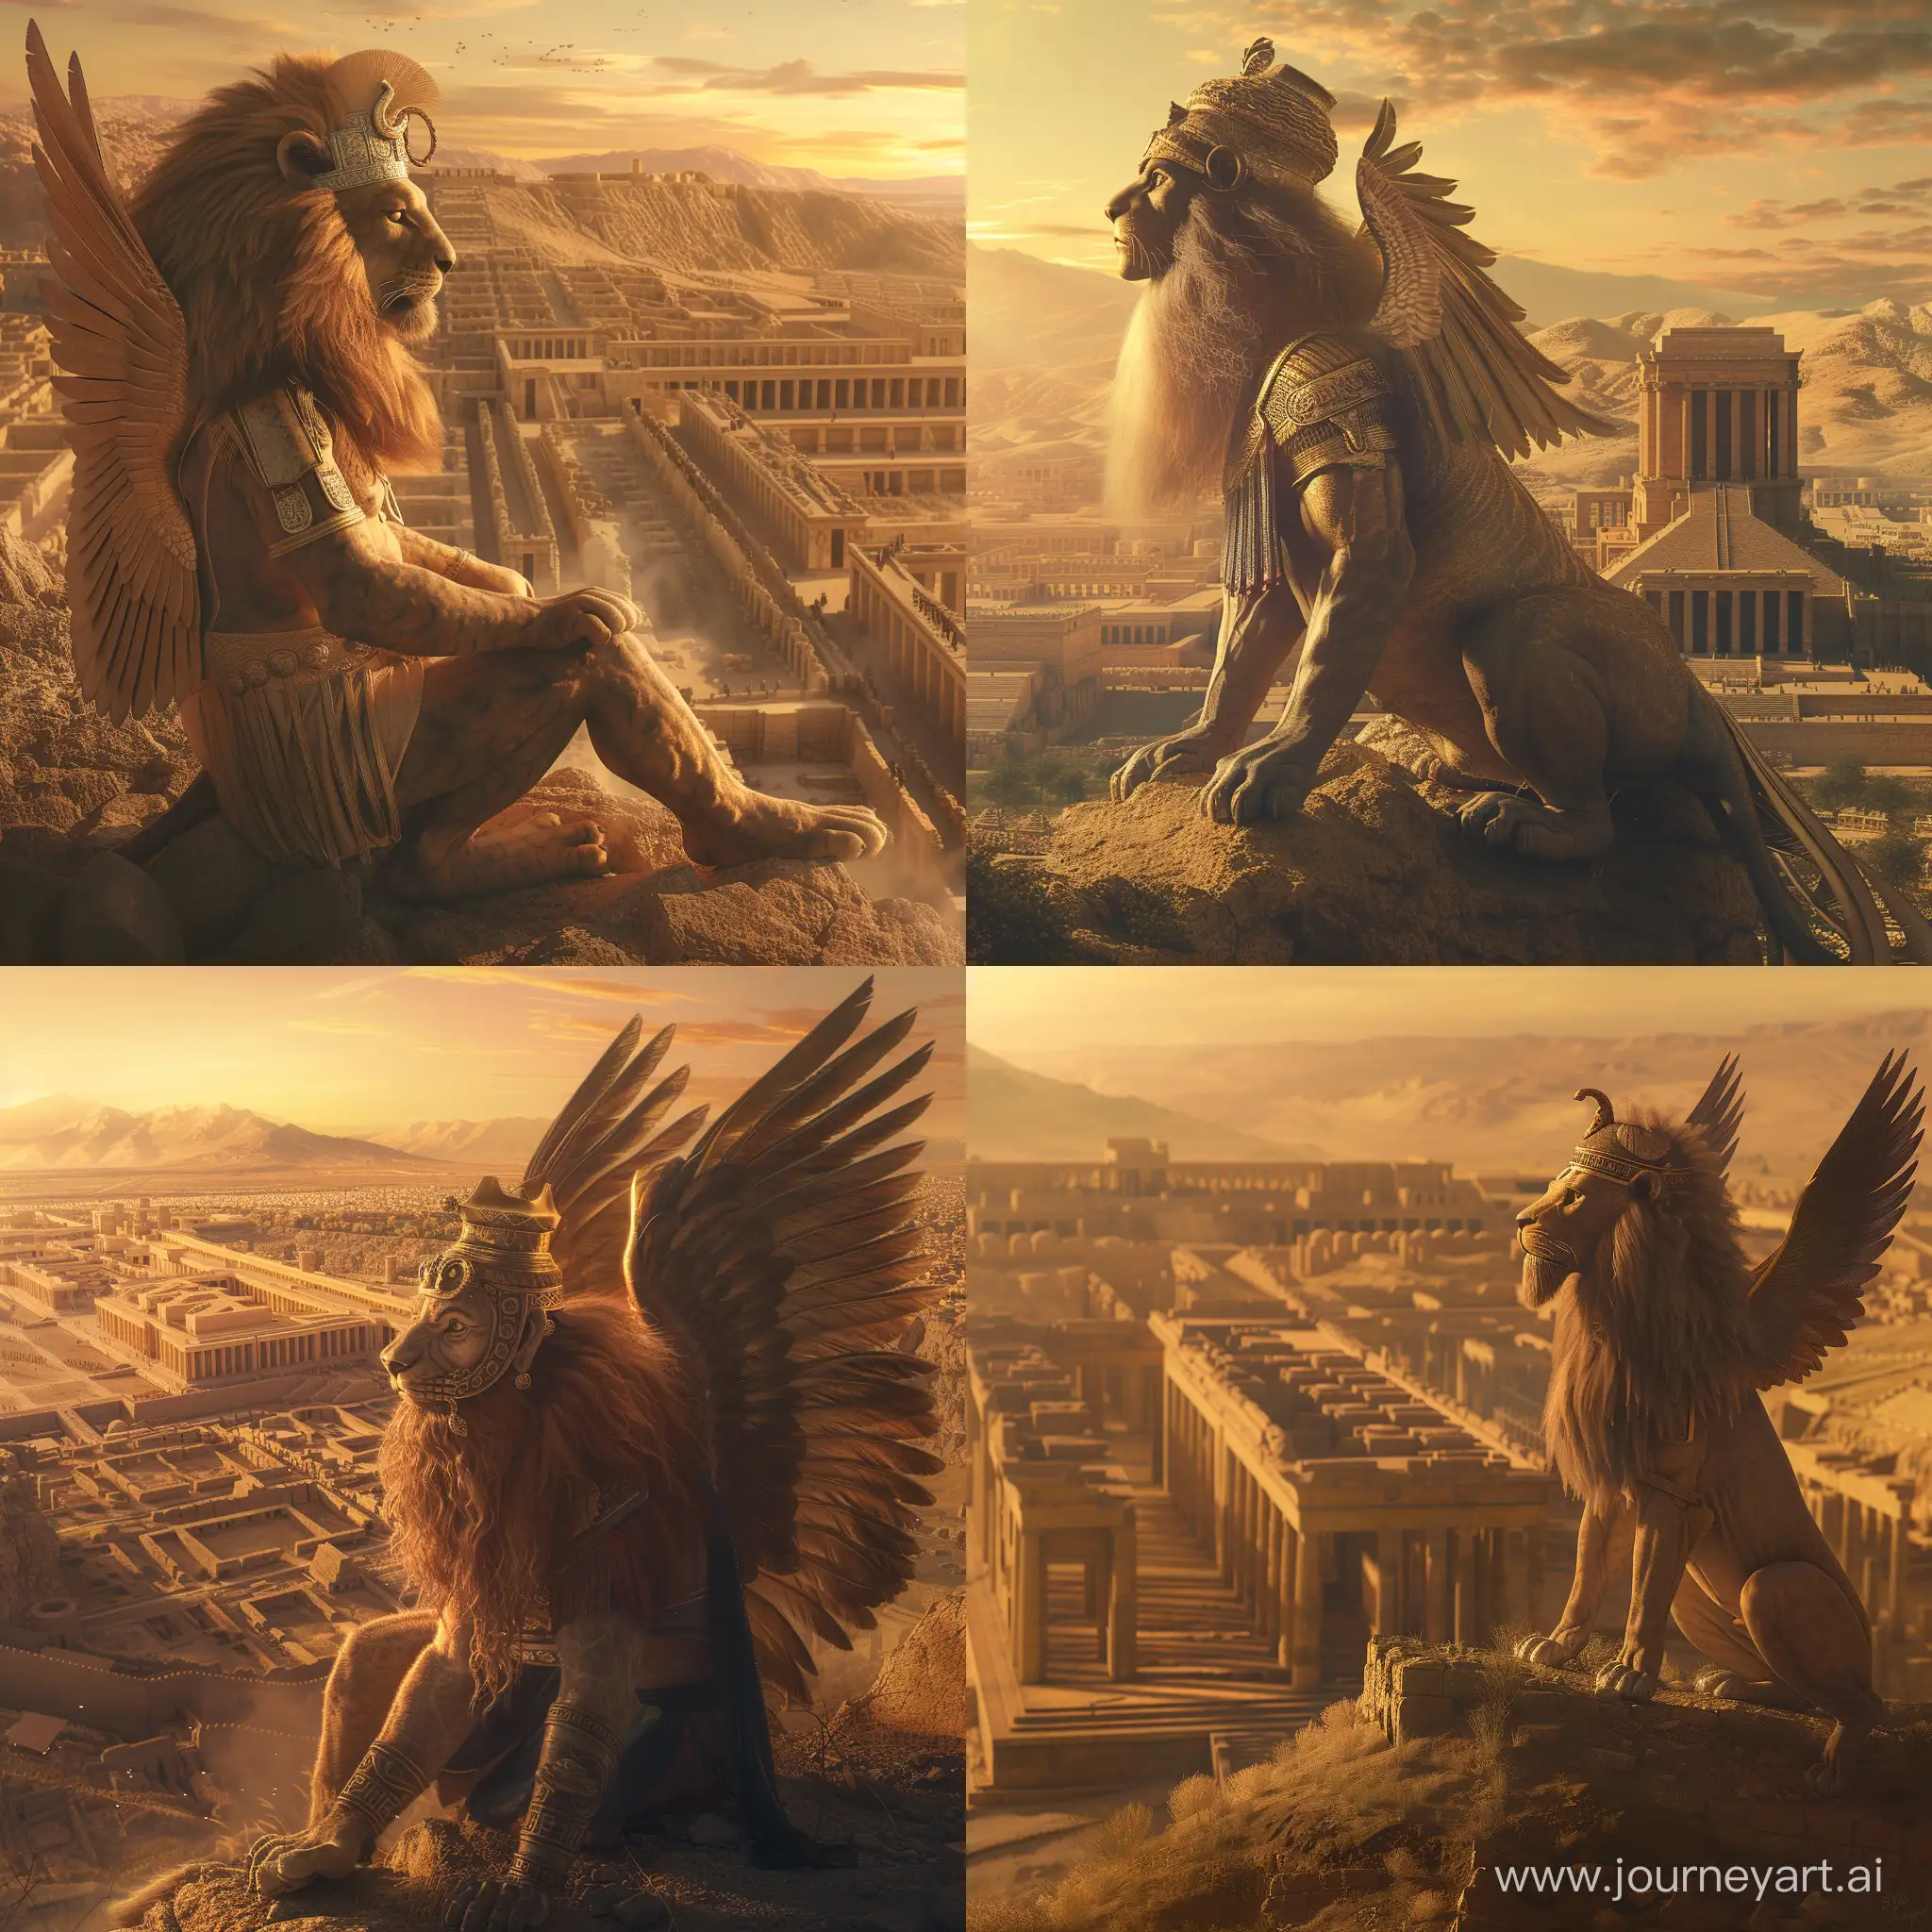 An animal with a head like an Achaemenid human face and a beard king and a lion's body and two wings is looking at Persepolis from the top of a hill in Persepolis. in an ancient civilization, cinematic, epic realism,8K, highly detailed, bird's eye view, golden hour lighting, make a realistic photo.